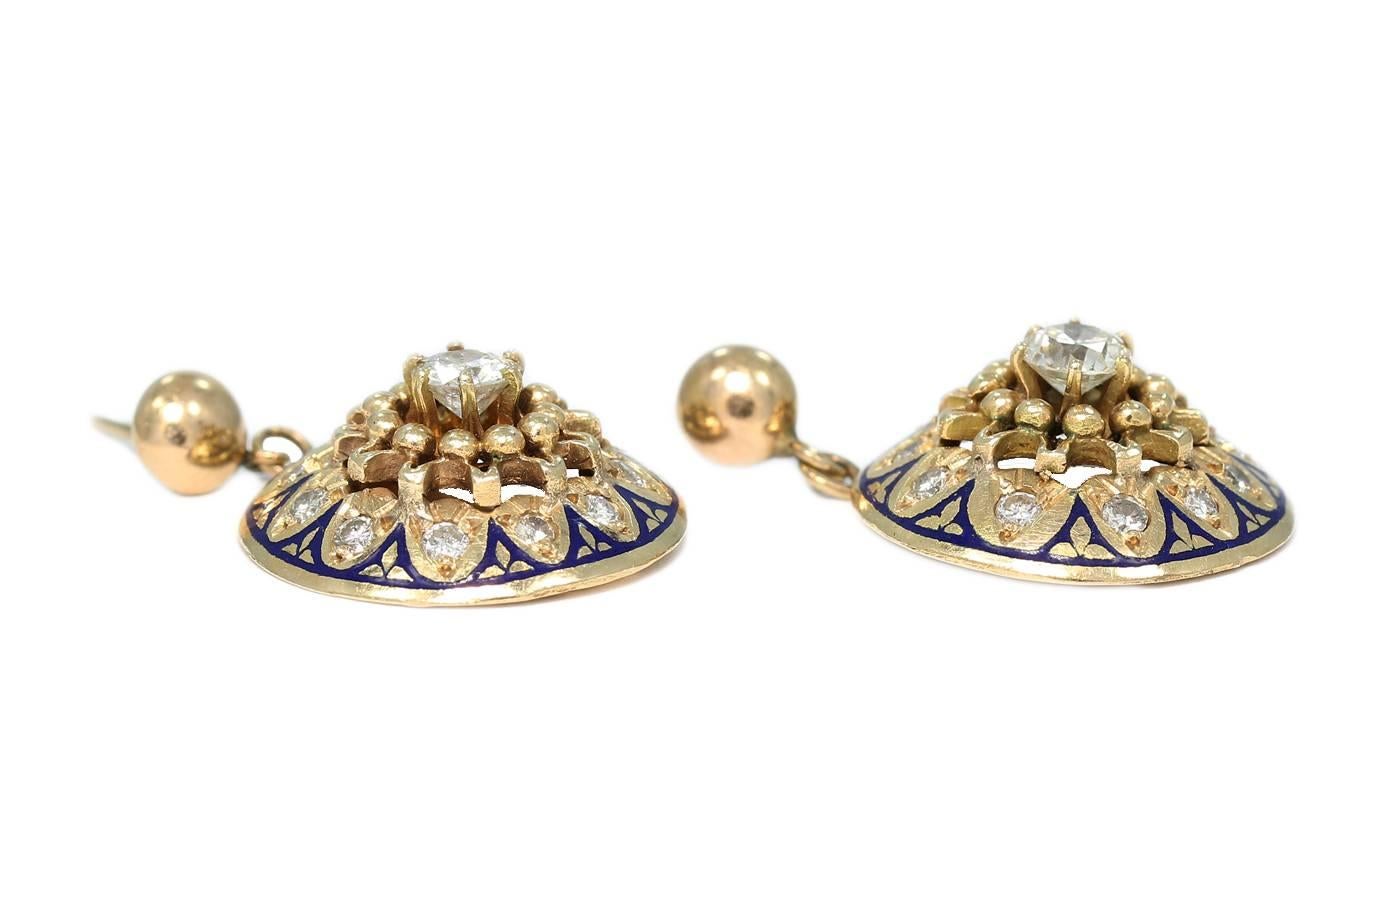 These beautiful estate earrings are created in 14k yellow gold with blue enameling and round diamonds. Center diamond in each earrings weighs approximately .50cts with an additional .22cts on each earring. The main section of the earrings has a